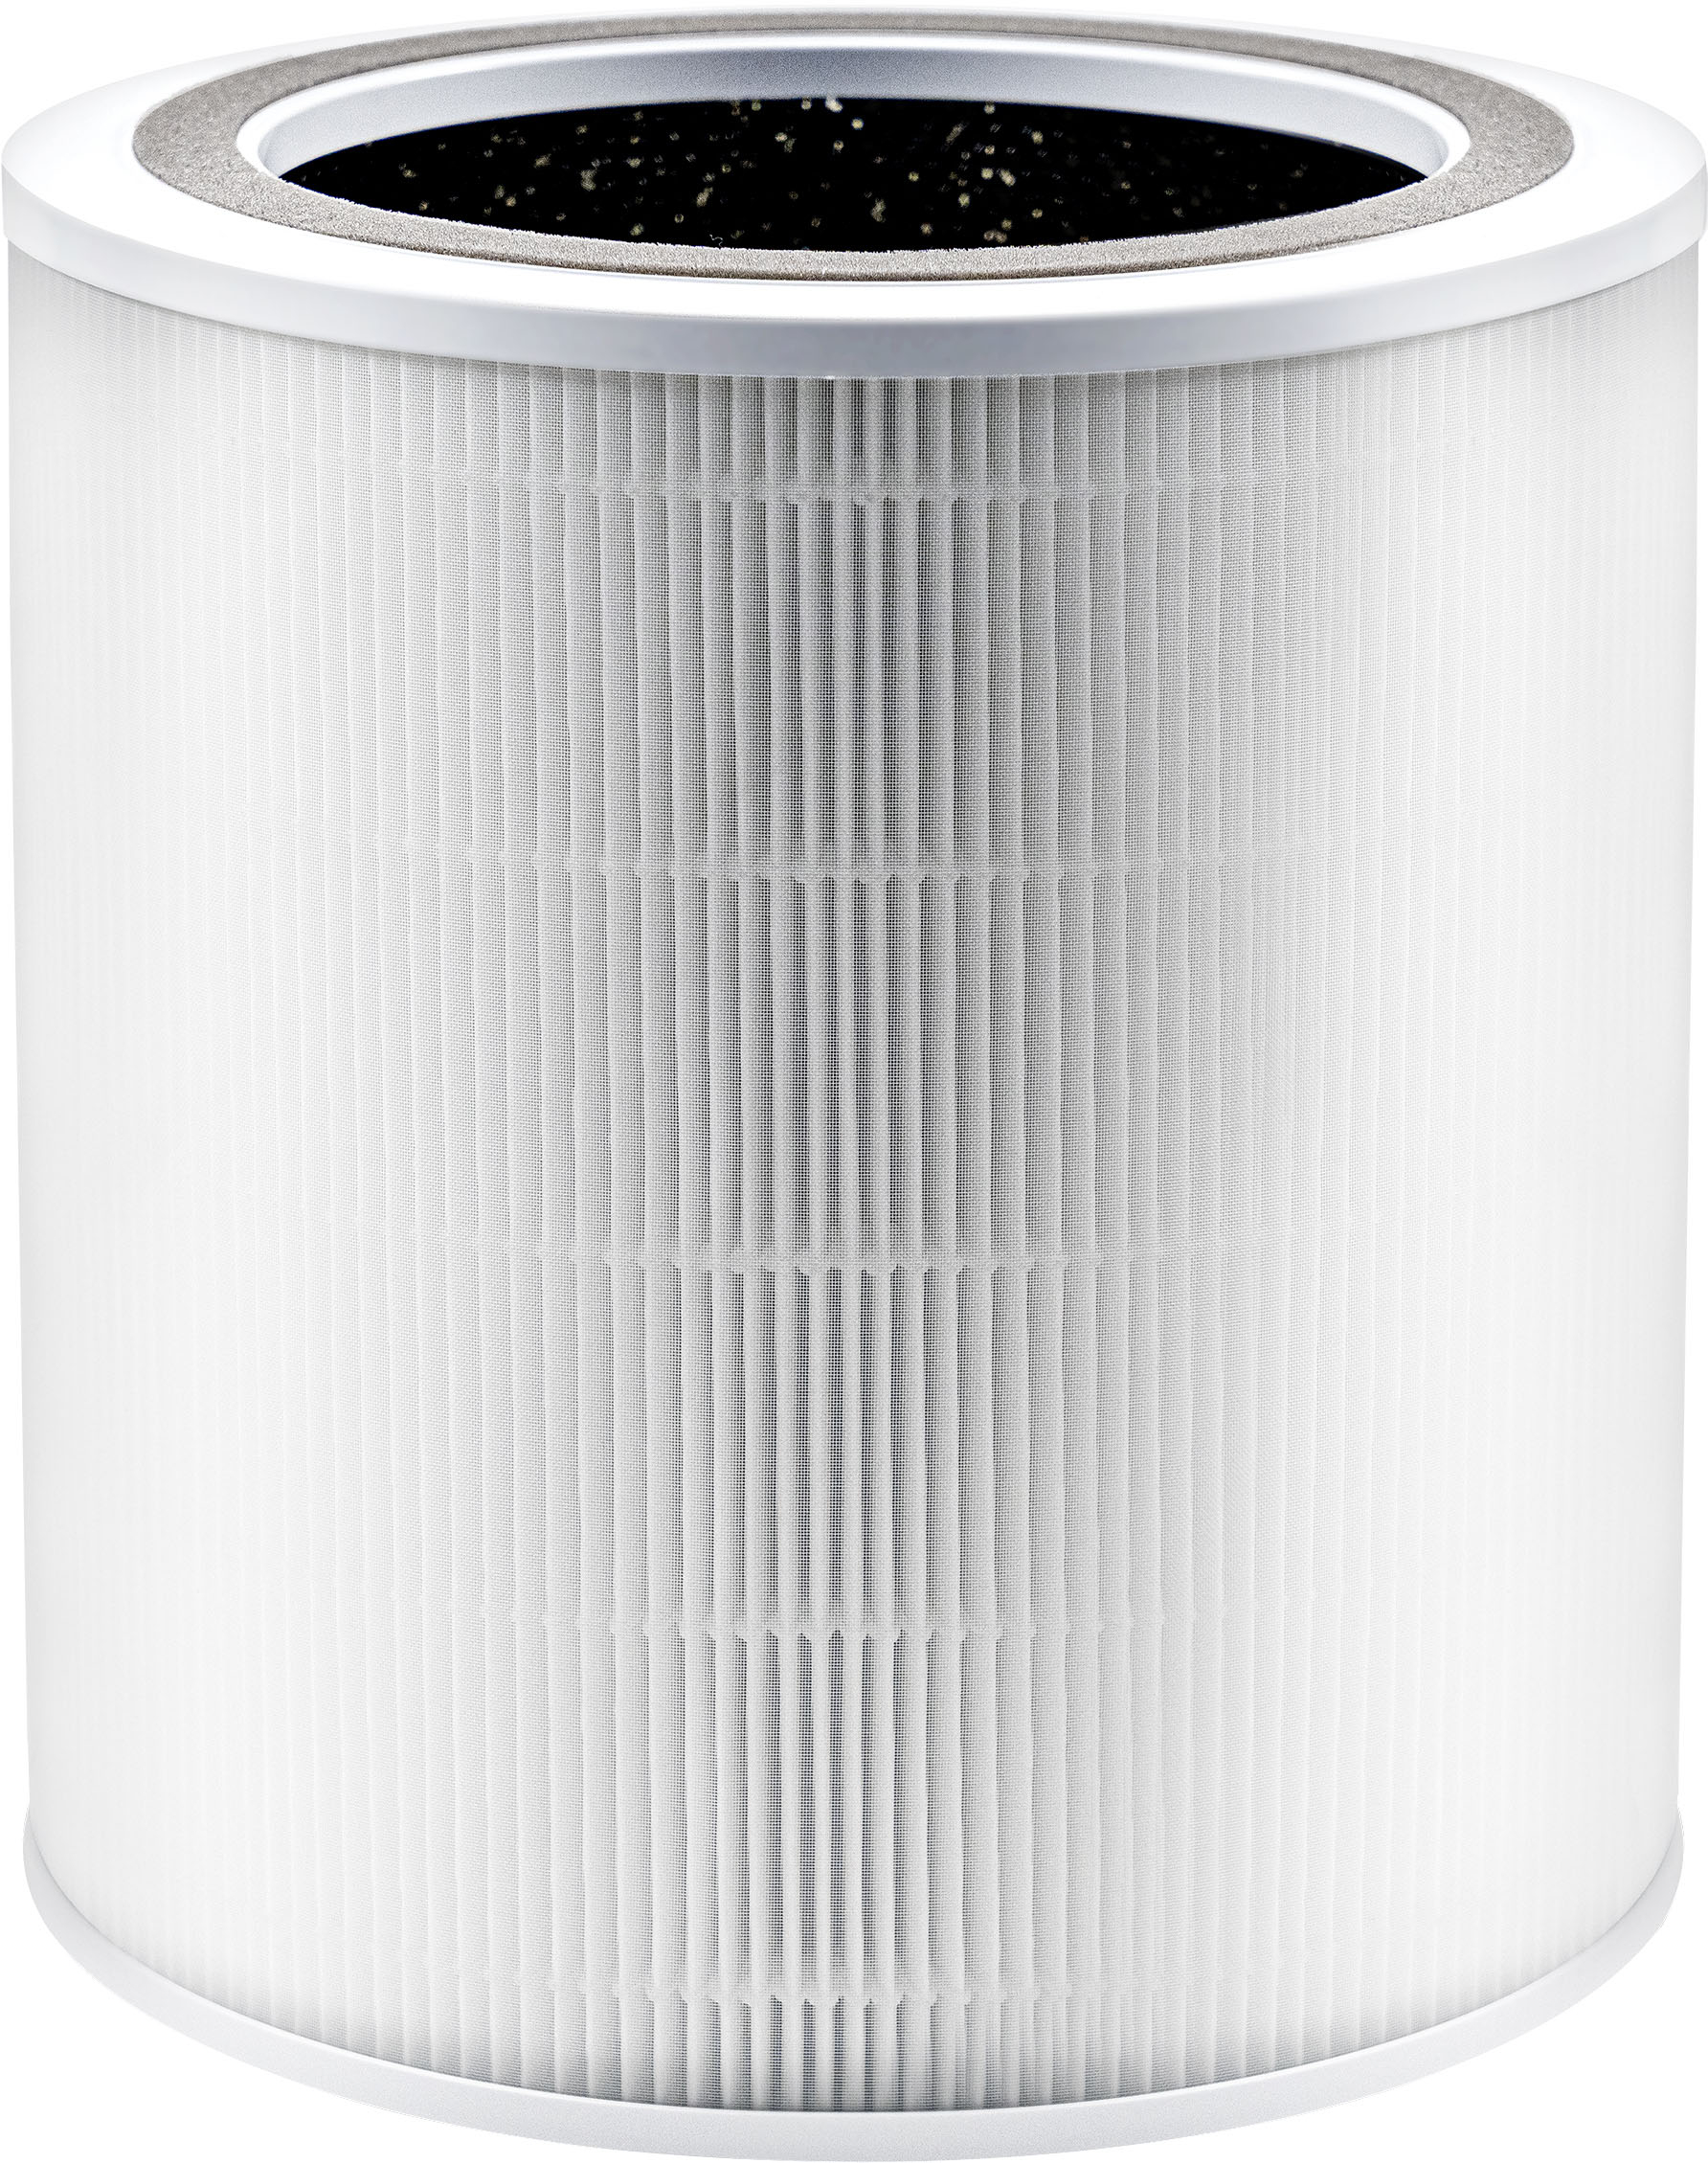 LEVOIT Core 400S Air Purifier 3-in-1 Replacement Filter, Core400S-RF,  1Pack, White